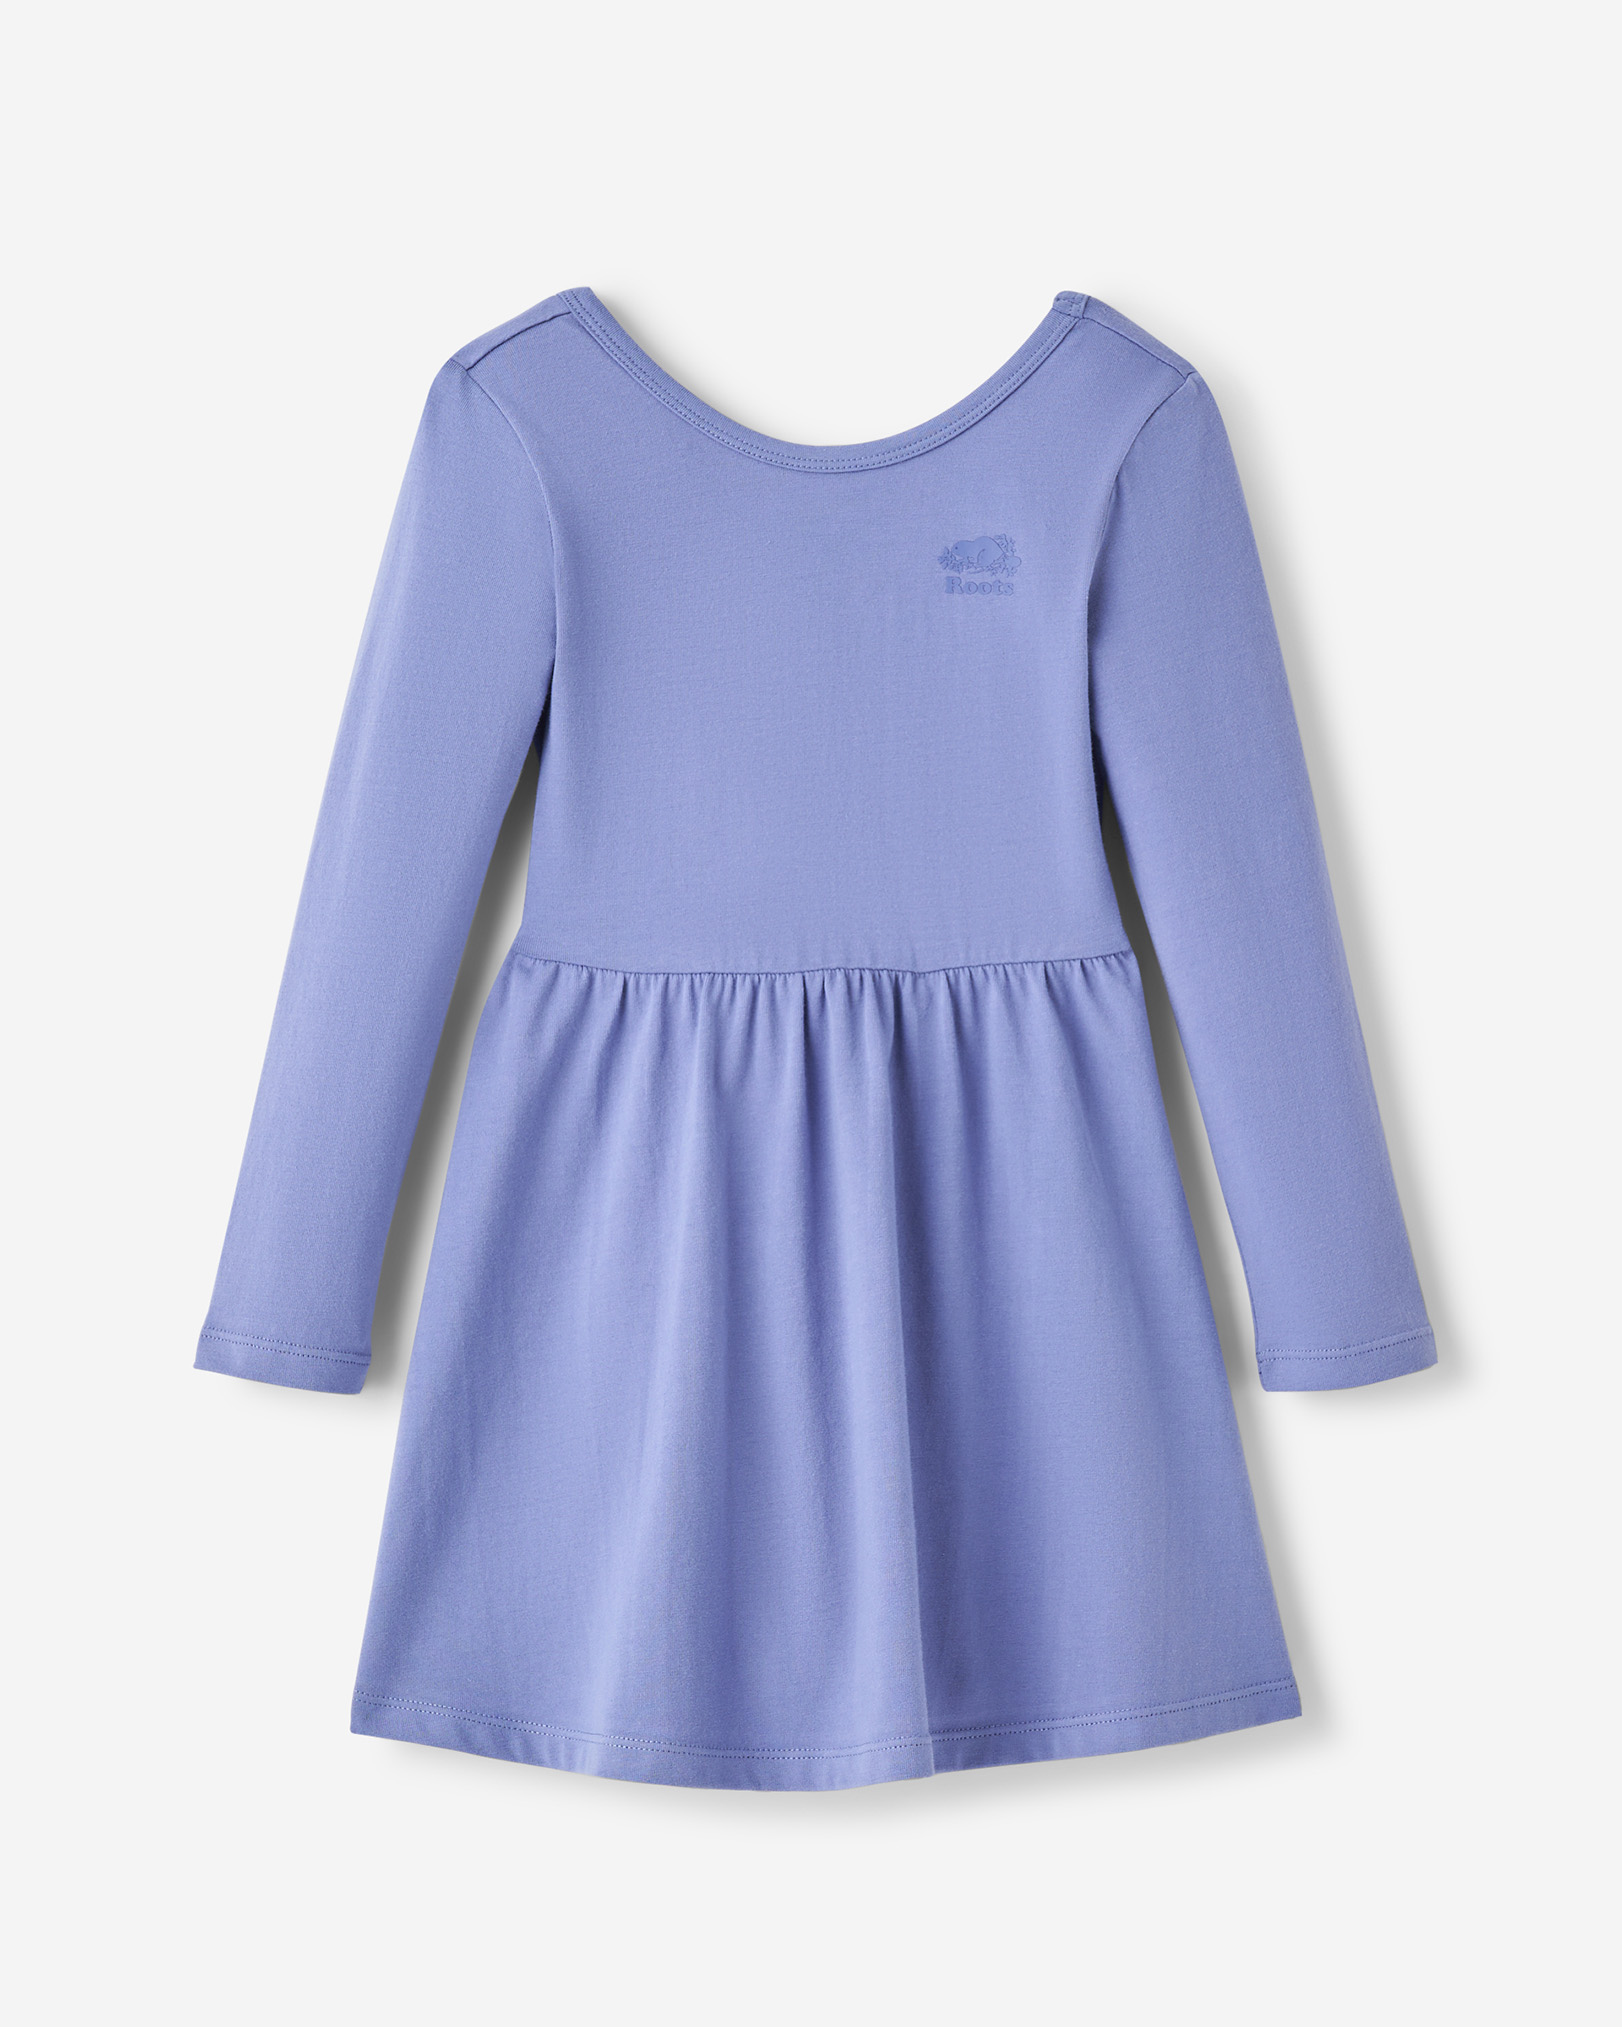 Roots Toddler Girl's Easy Stretch Dress in Periwinkle Purple